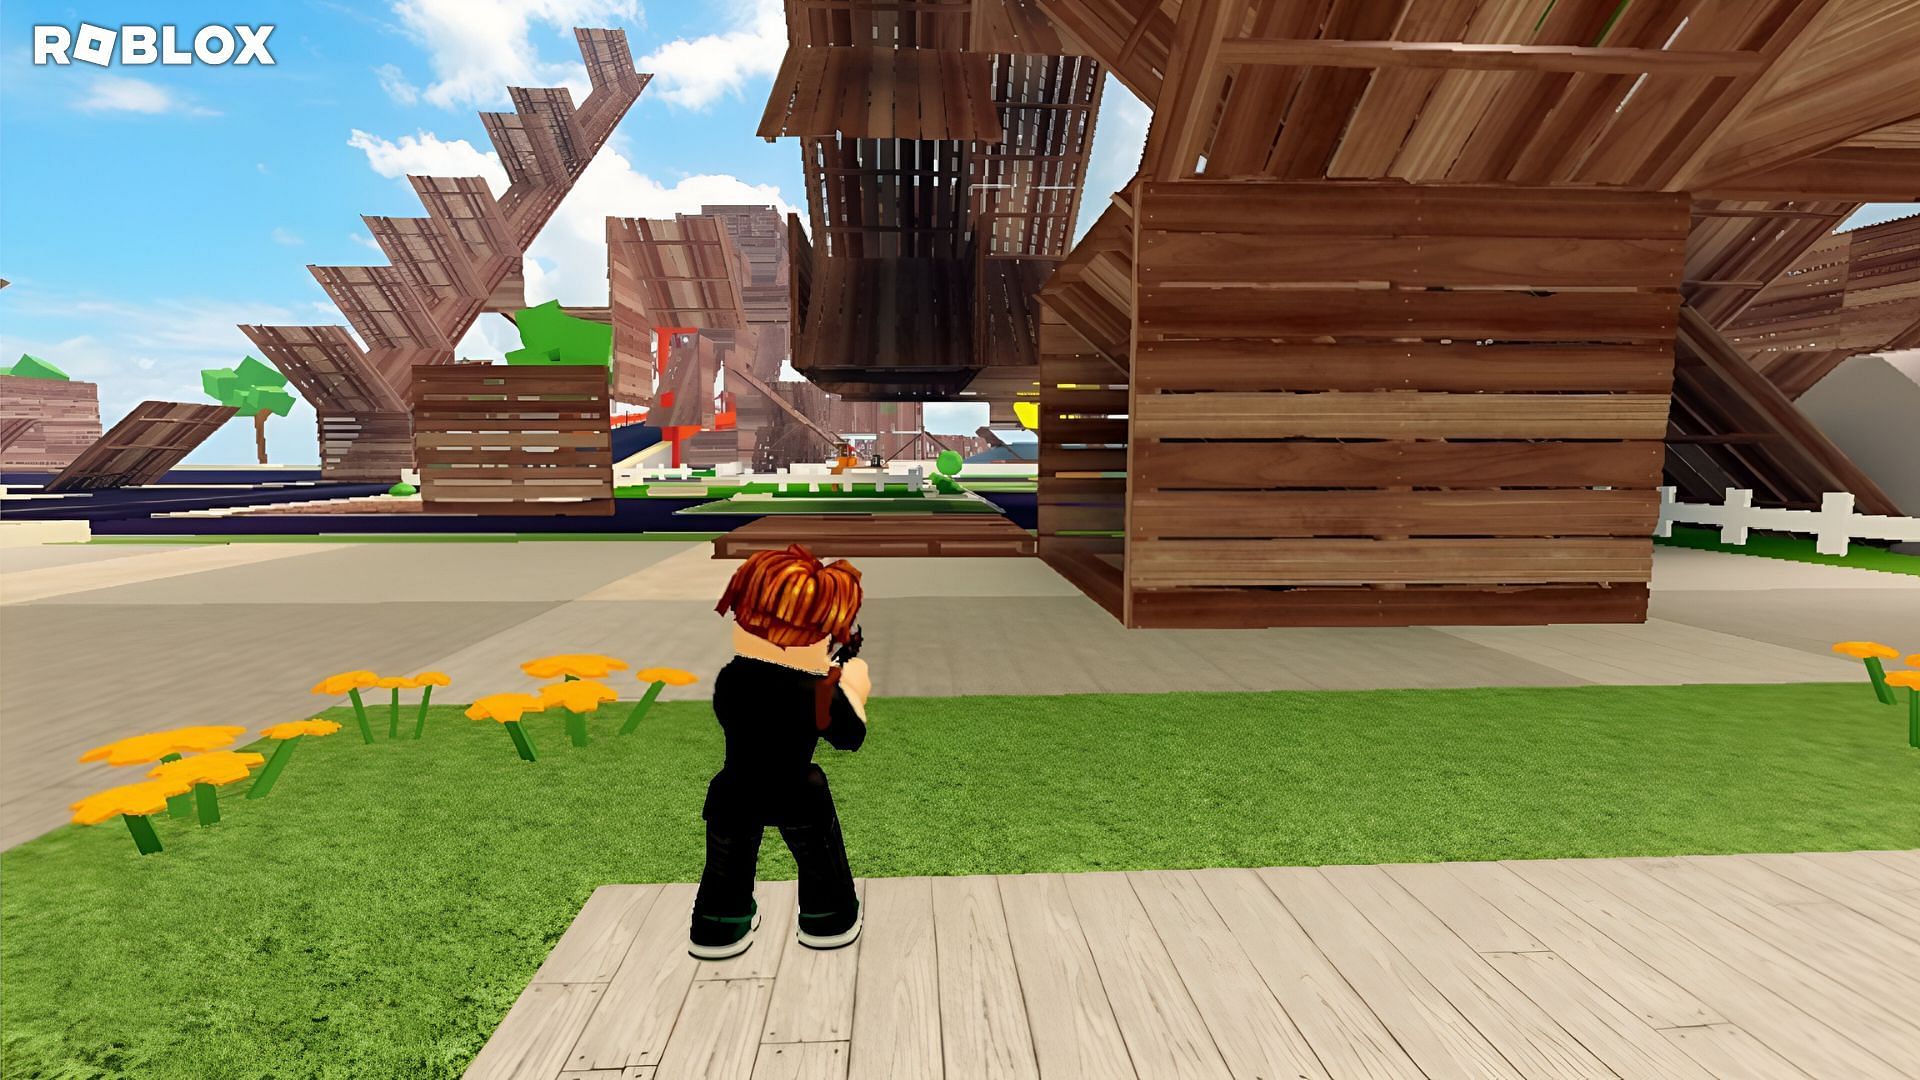 Gameplay cover for Foblox (Image via Roblox)